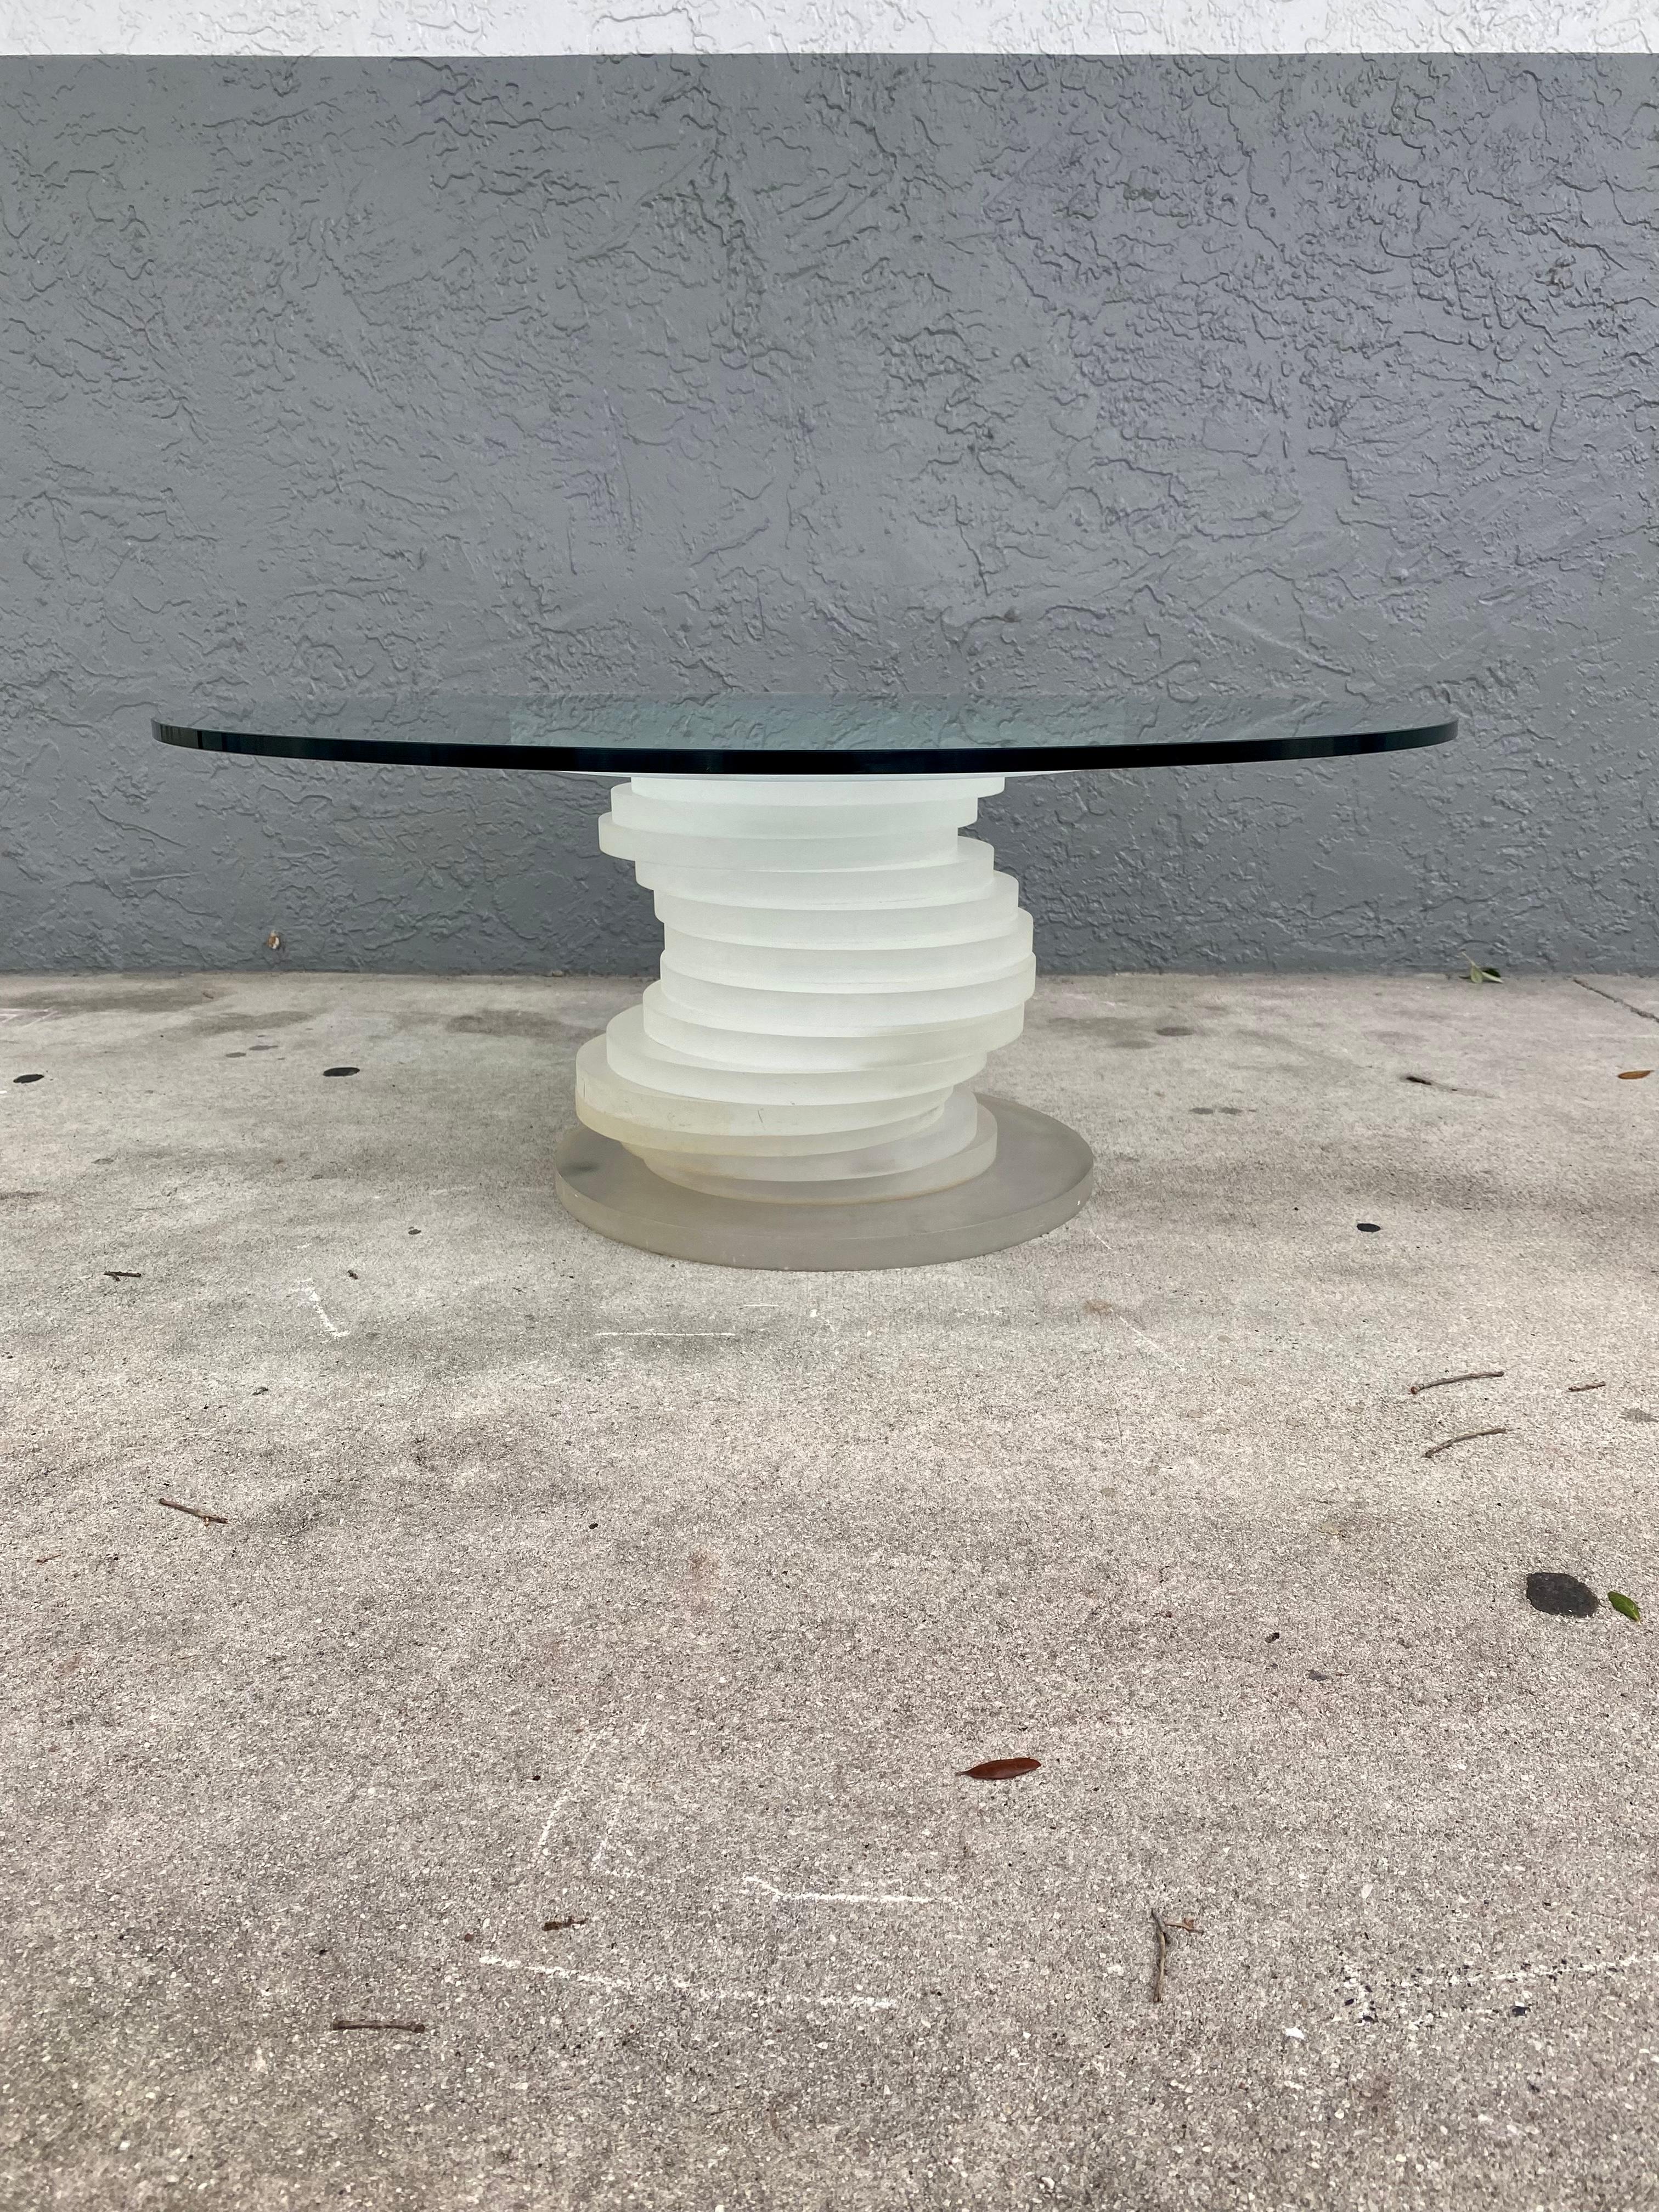 The beautiful rare frosted lucite coffee table is statement piece which is packed with personality! Just look at the gorgeous sculptural stacked circular lucite on this beauty! The table is individually produced and finished with the highest level